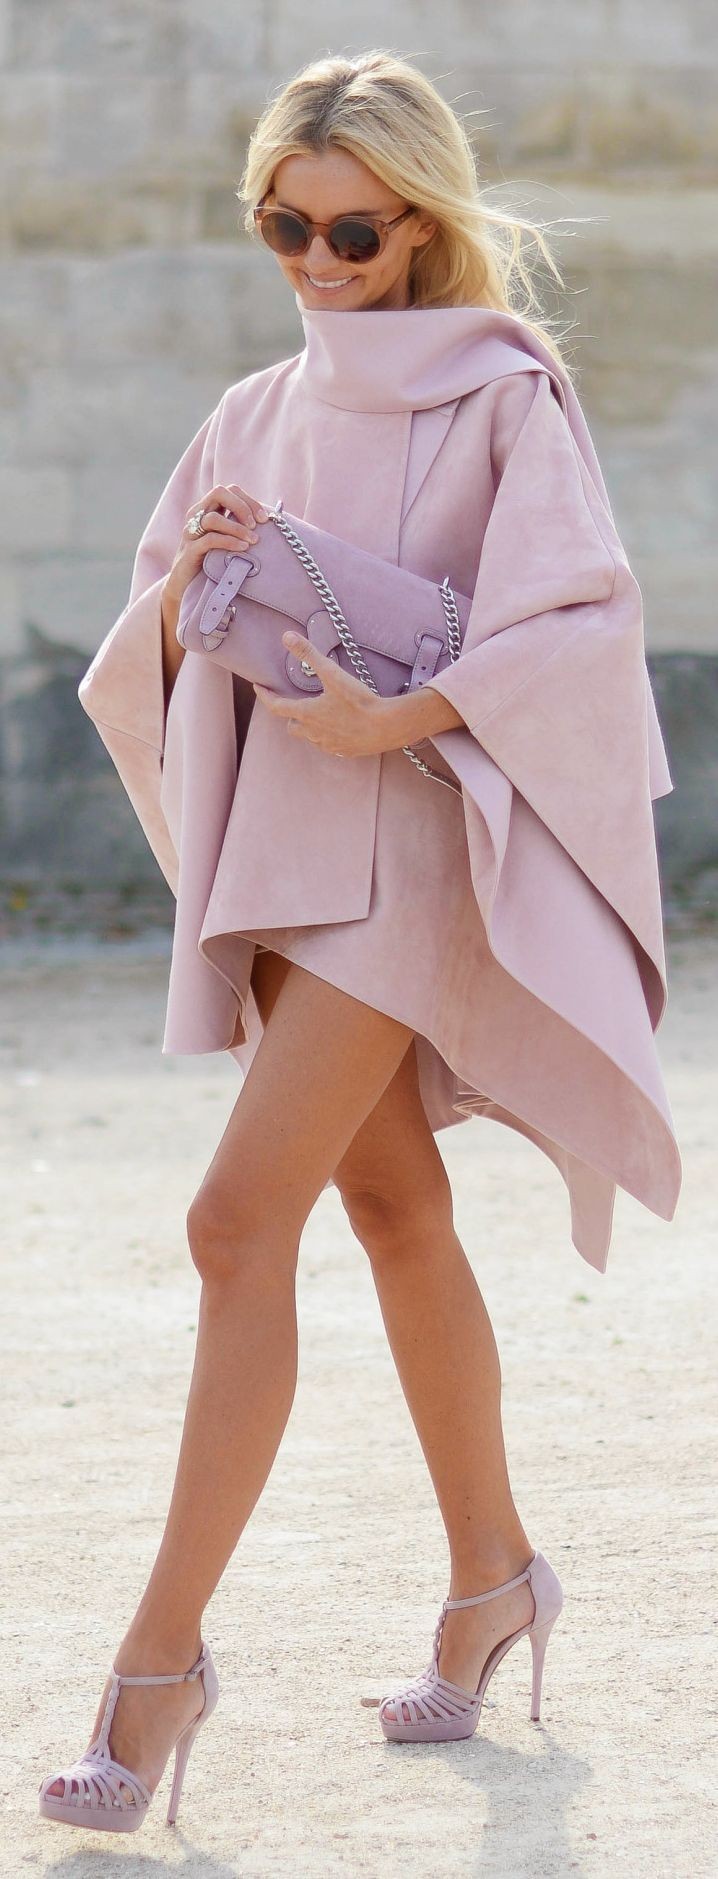 Shades Of Pink Chic Style